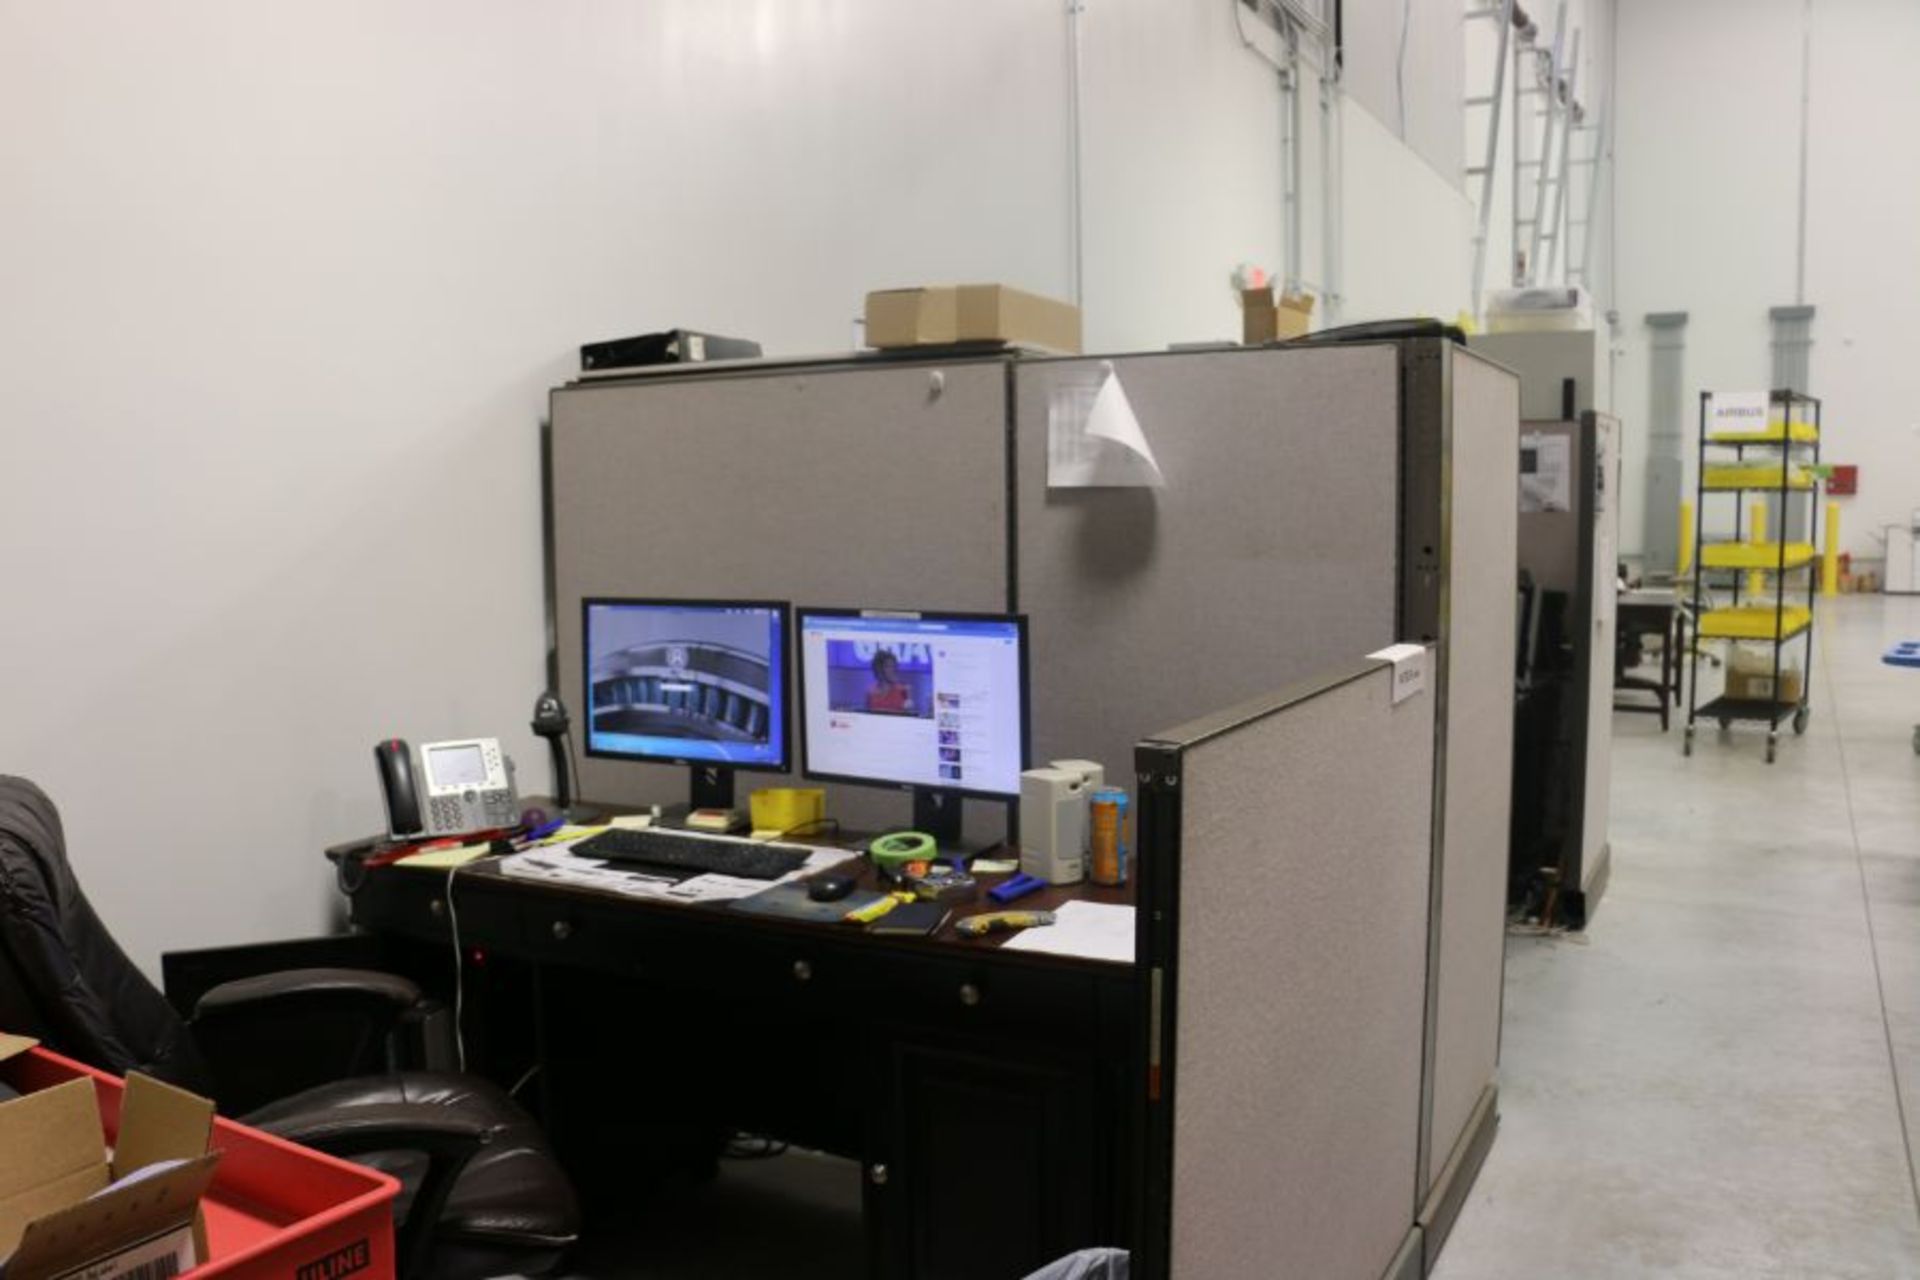 Cubicles with Office Desks *No Content* - Image 4 of 4